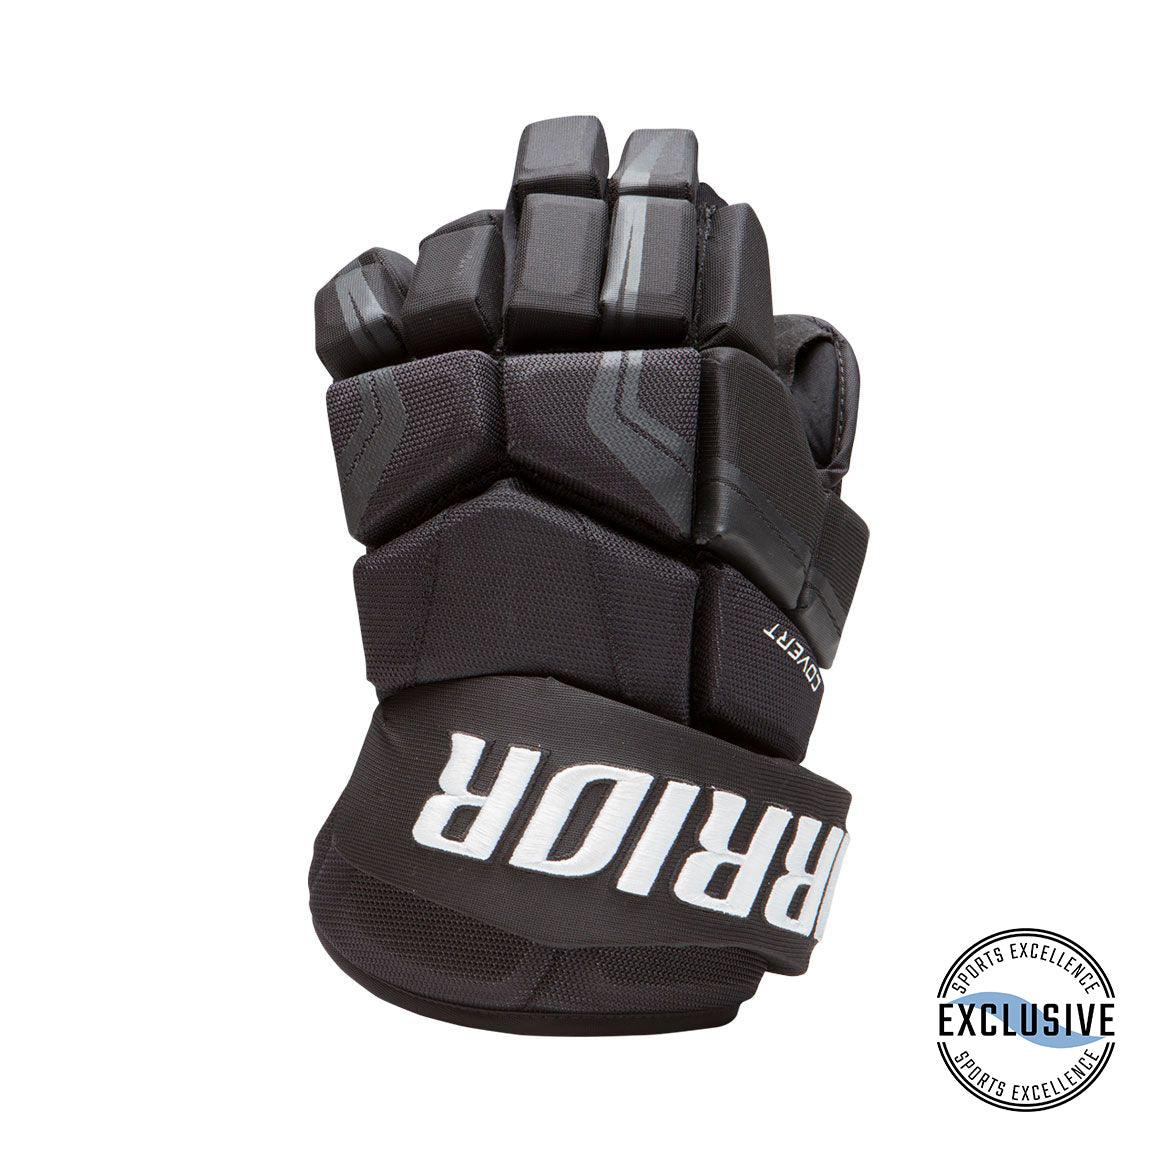 Covert QRE Snipe Pro Hockey Glove - Junior - Sports Excellence